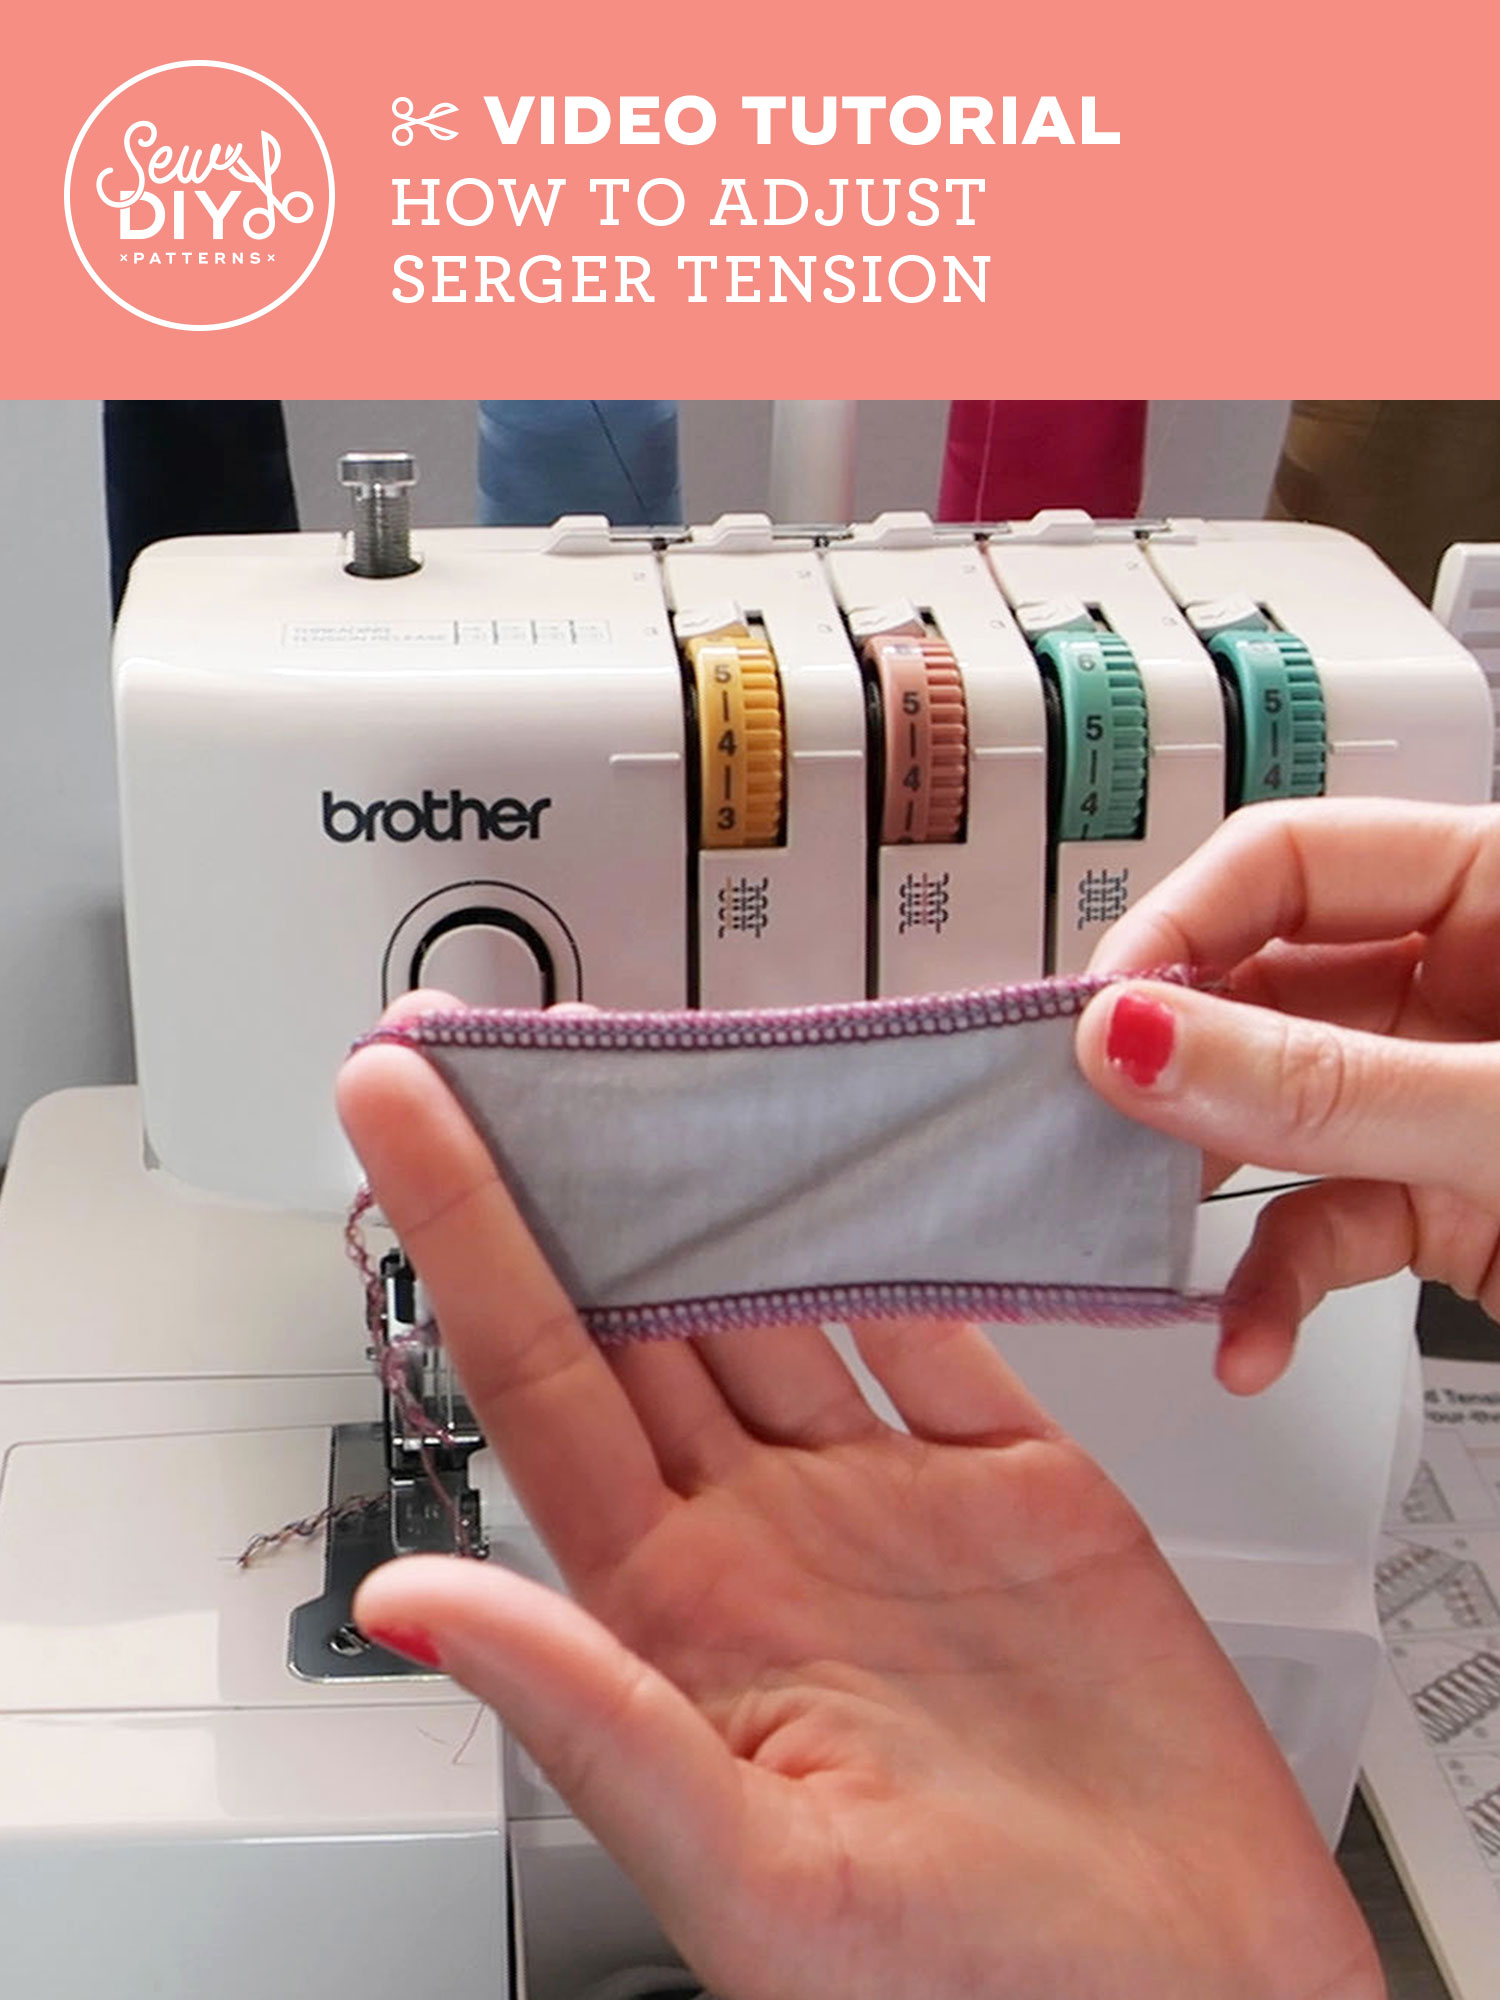 DIYU: How to Thread Your Sewing Machine